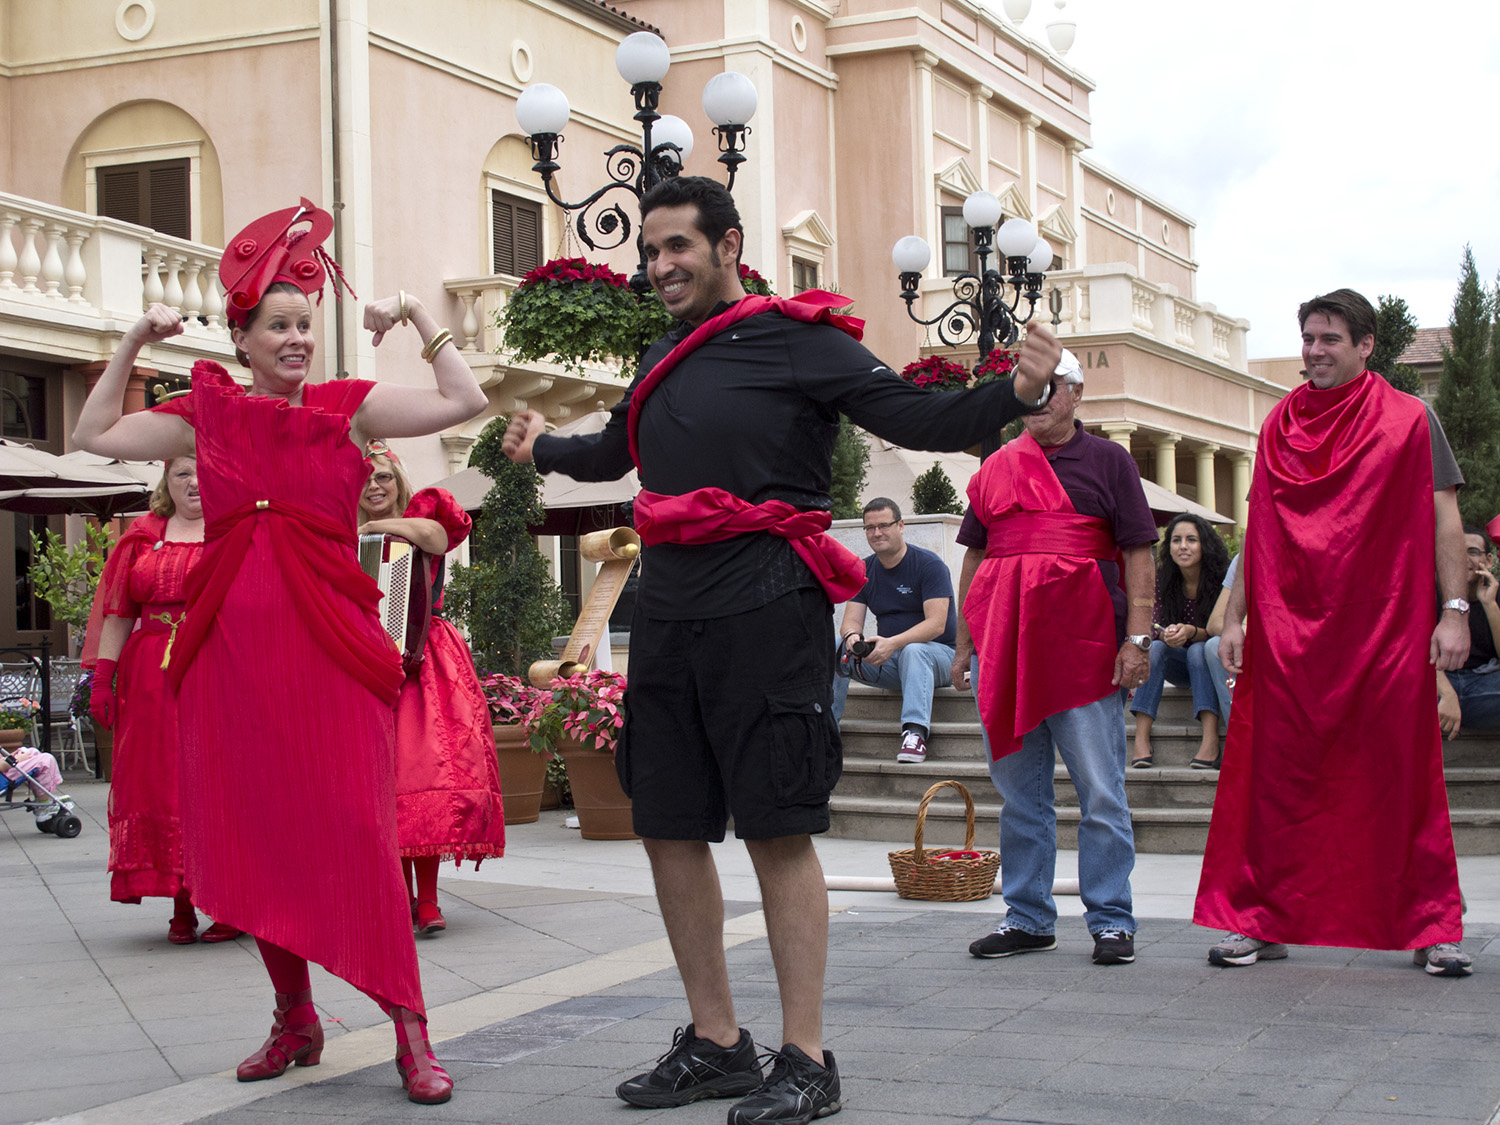 Epcot - Italy Street Performers